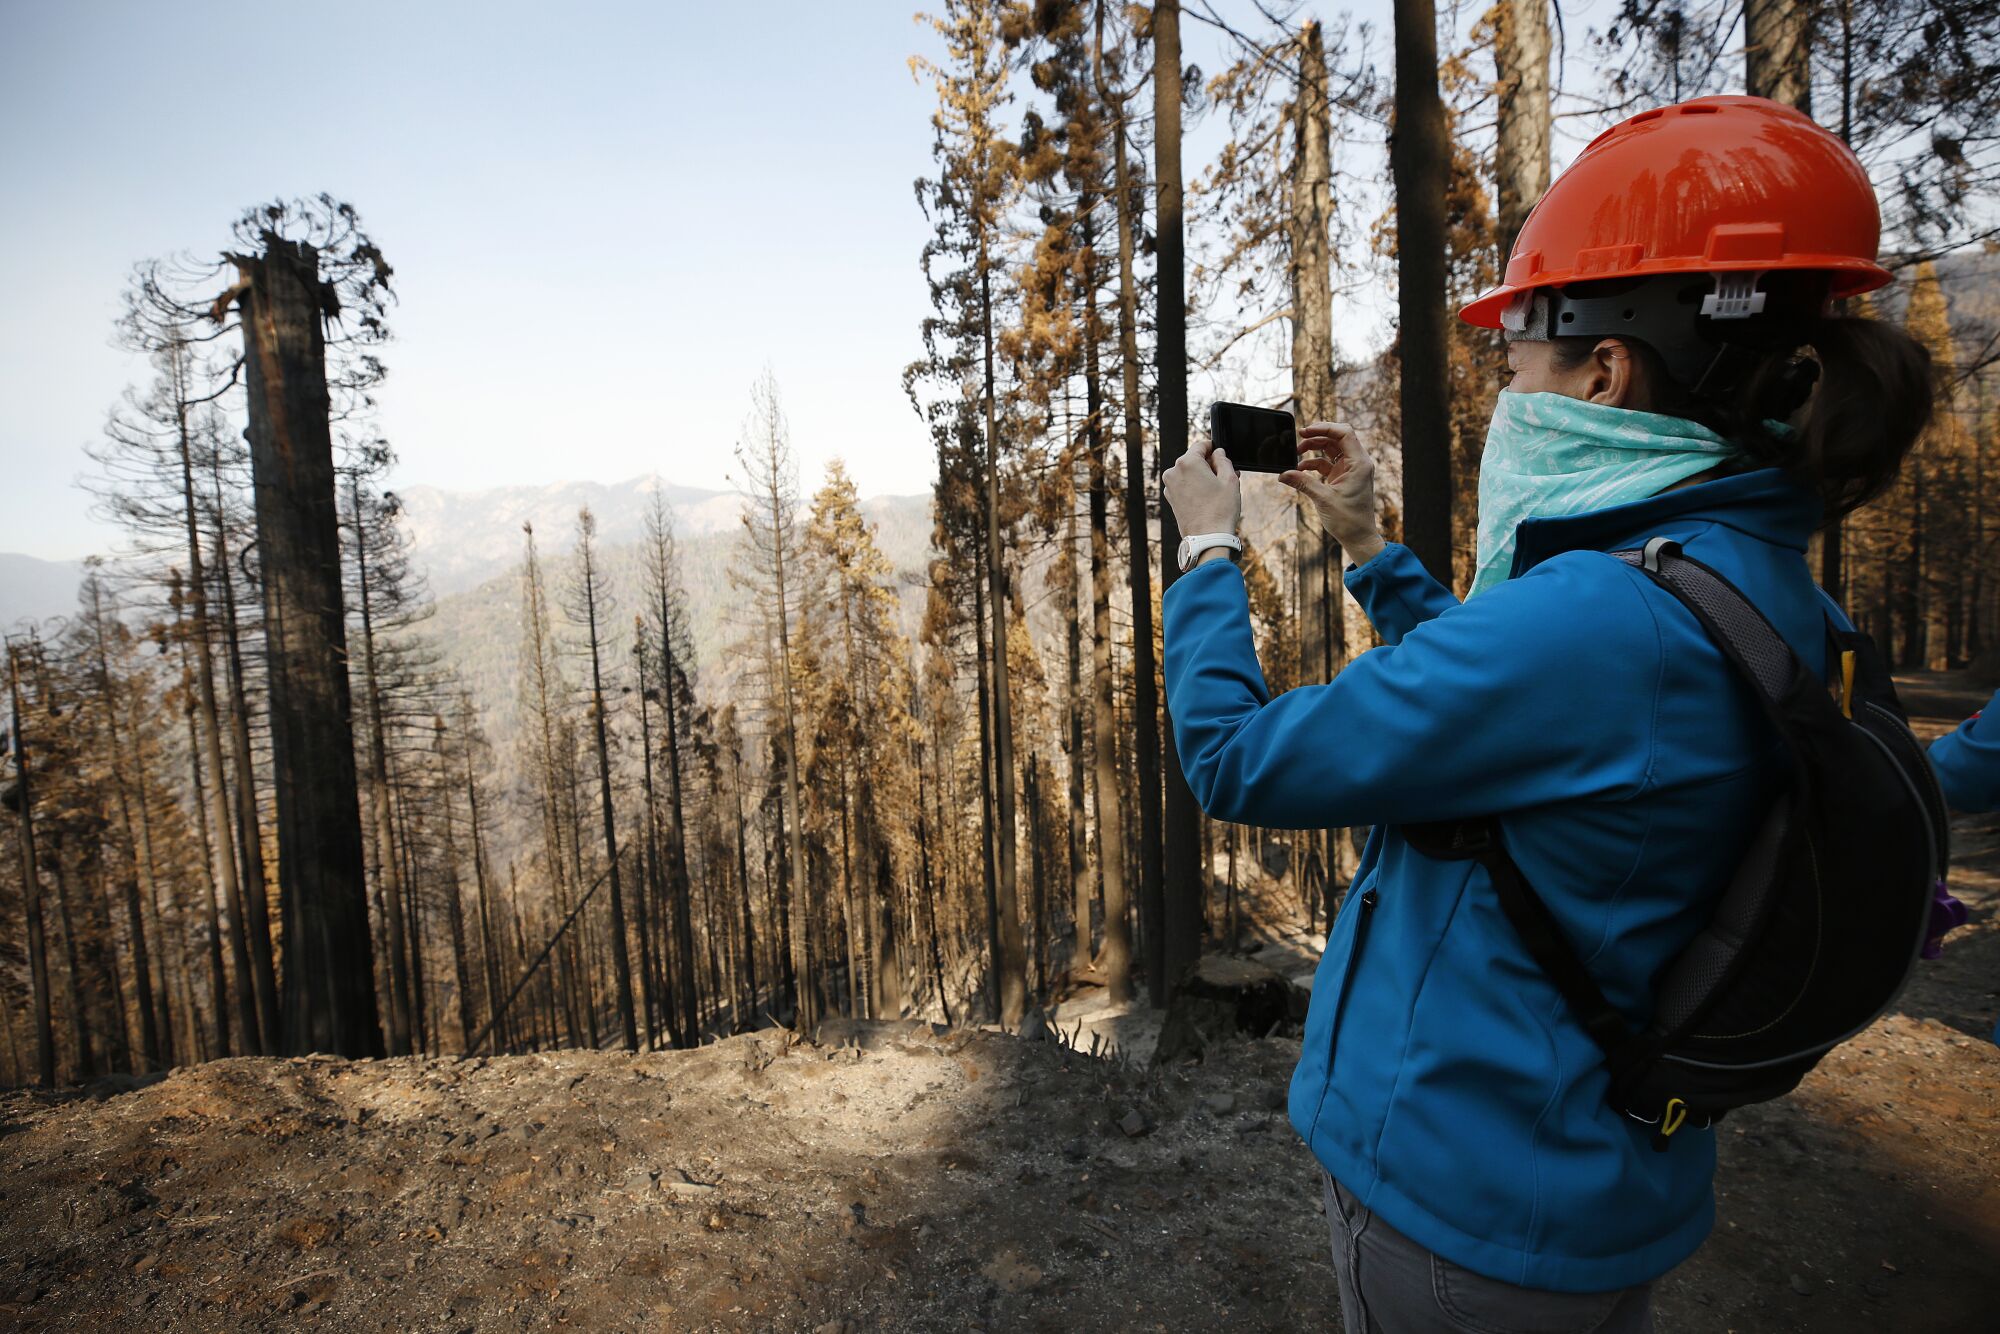 A woman in an orange hard hat uses a cellphone to take a photo of the charred remains of a tree